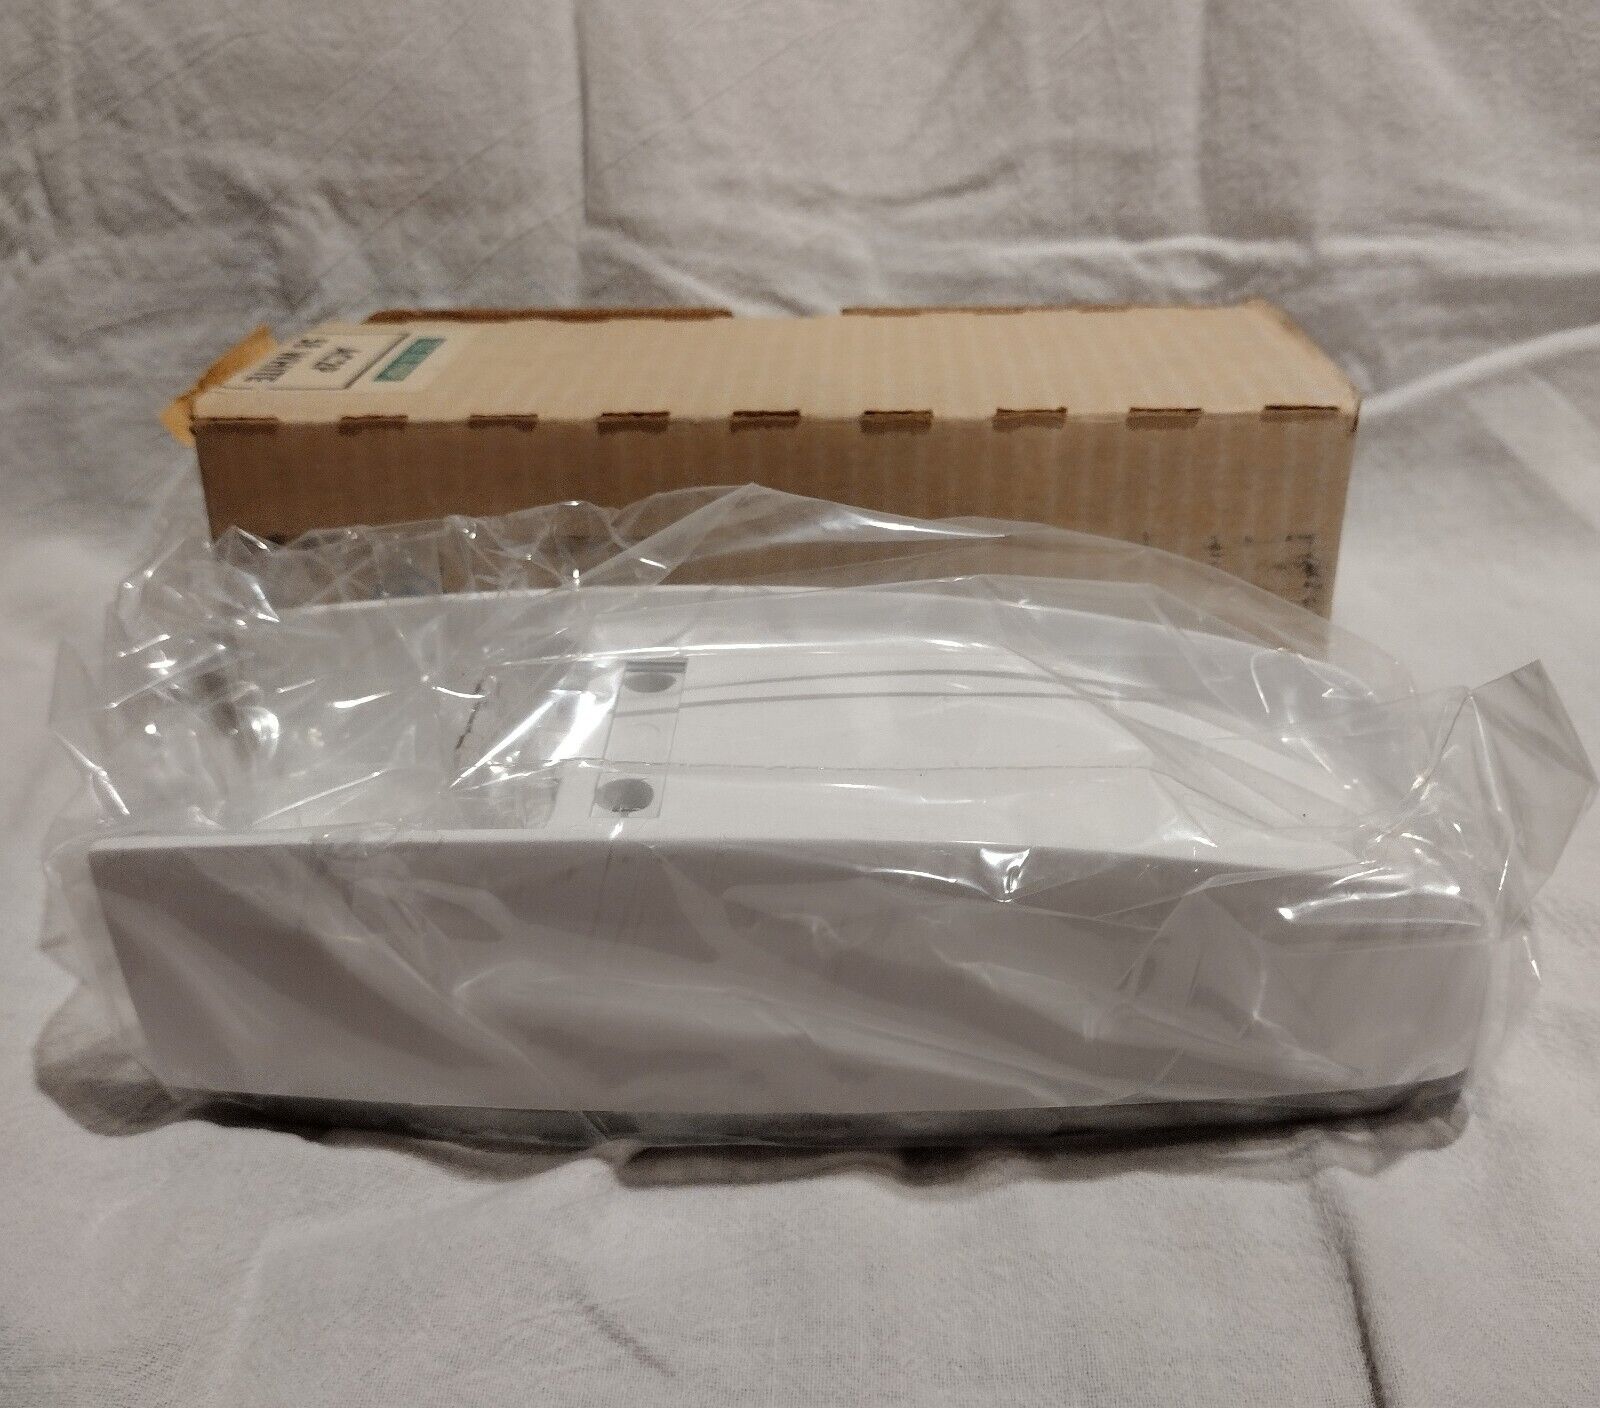 NOS - Vintage WESTERN ELECTRIC AC2P Telephone Base - White  In Original Box